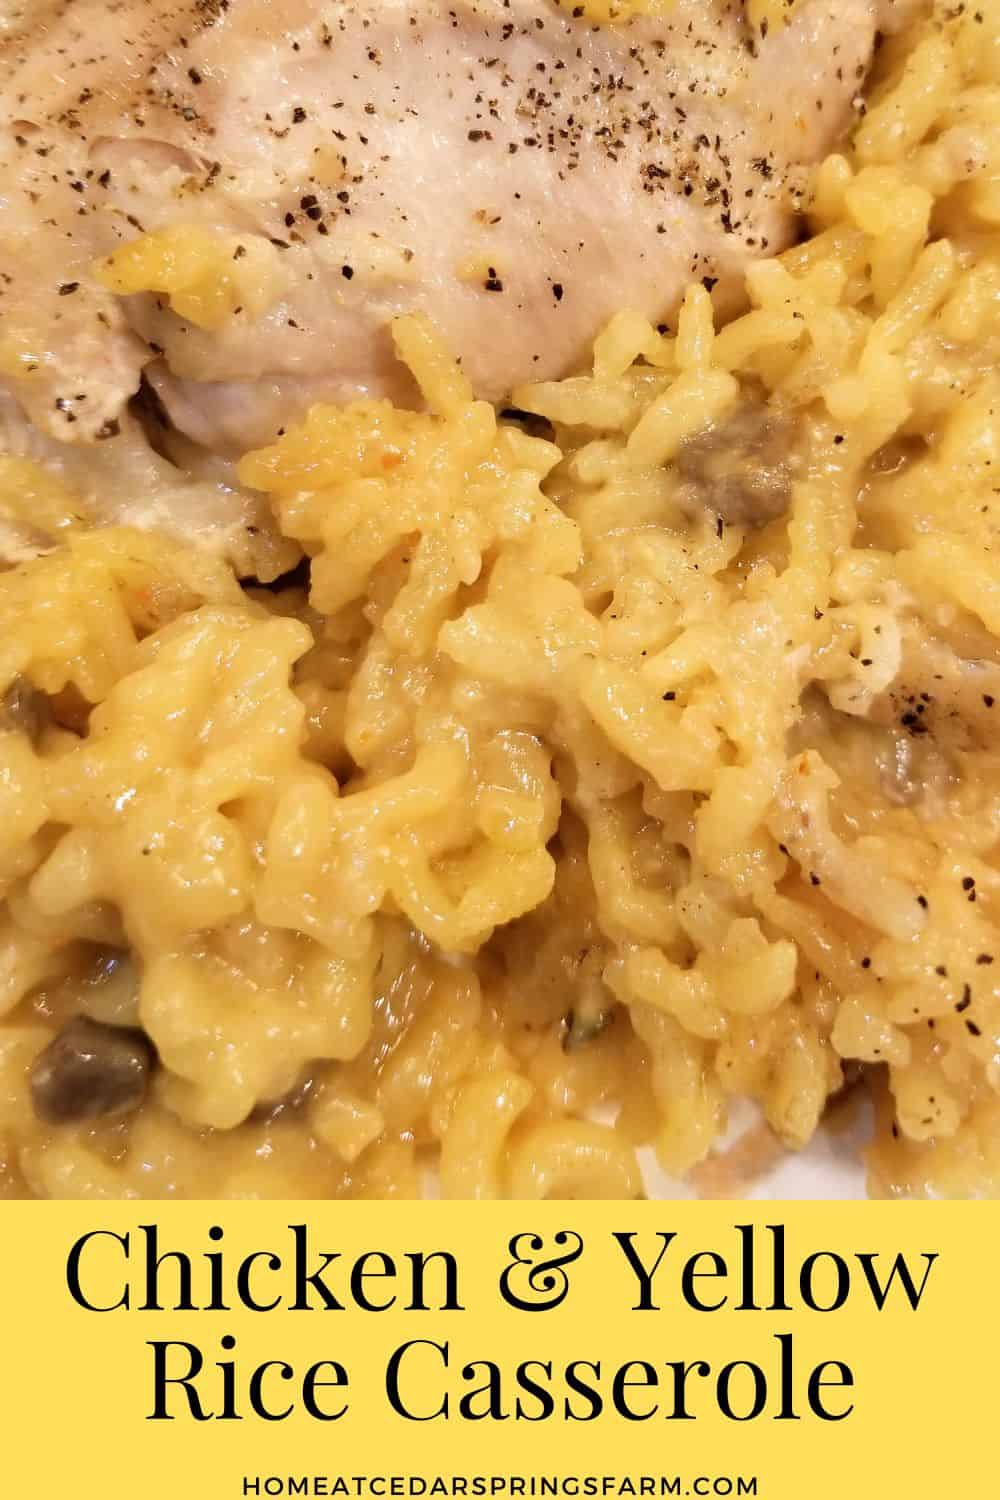 Chicken and yellow rice on a plate with text overlay.